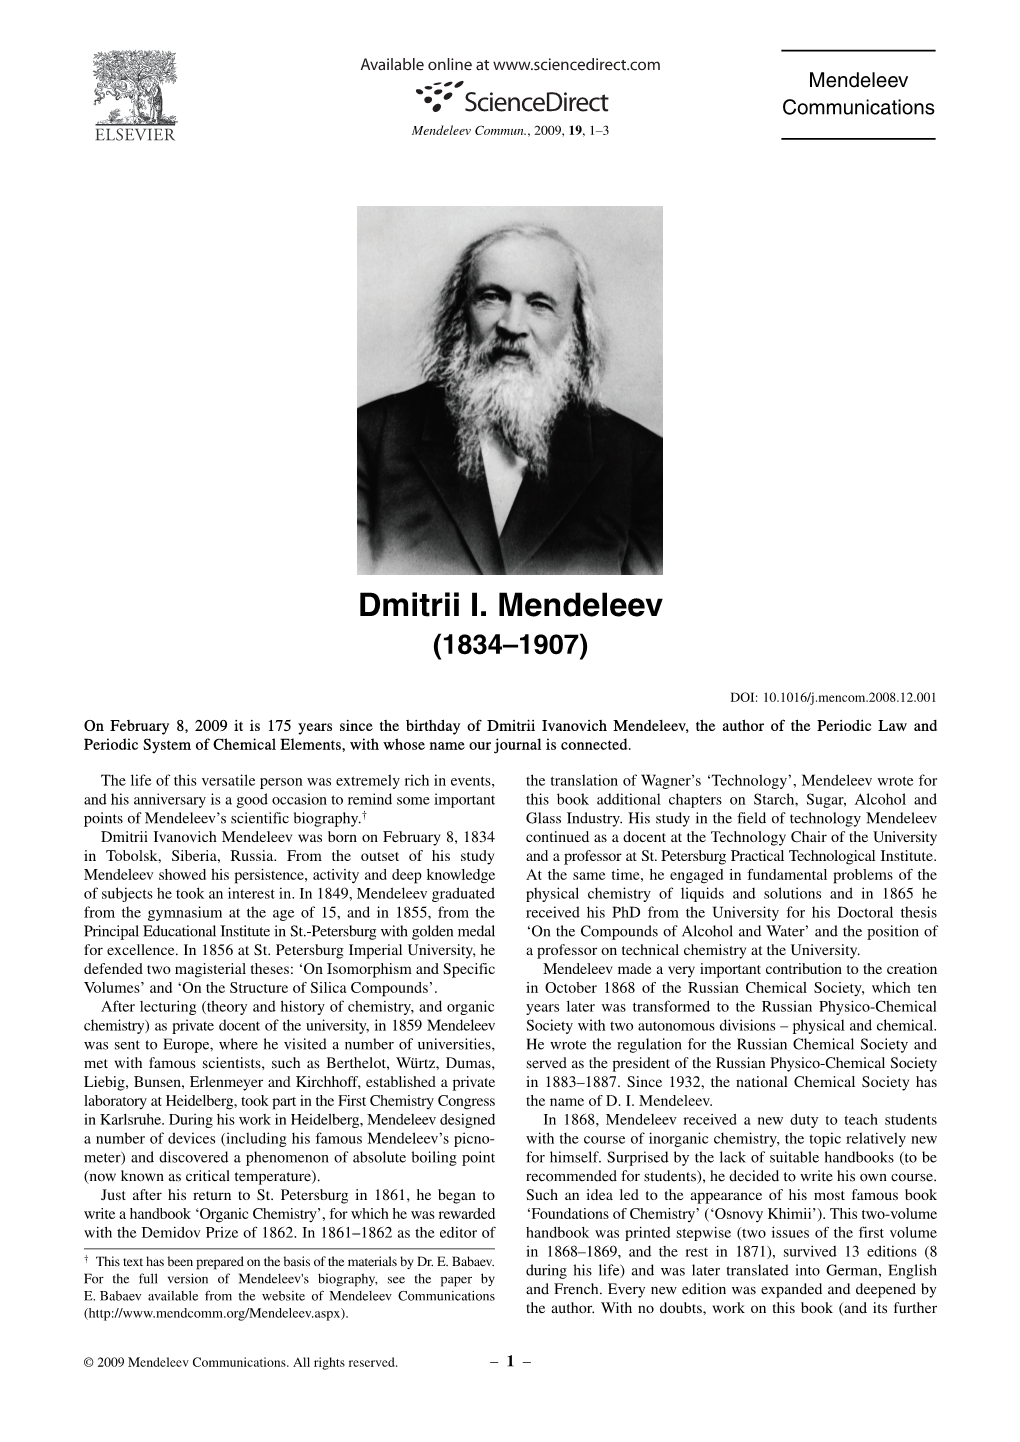 Dmitriy Mendeleev (1834- 1907), Father of the Periodic Table, the Great Scientist, Thinker and Patriot